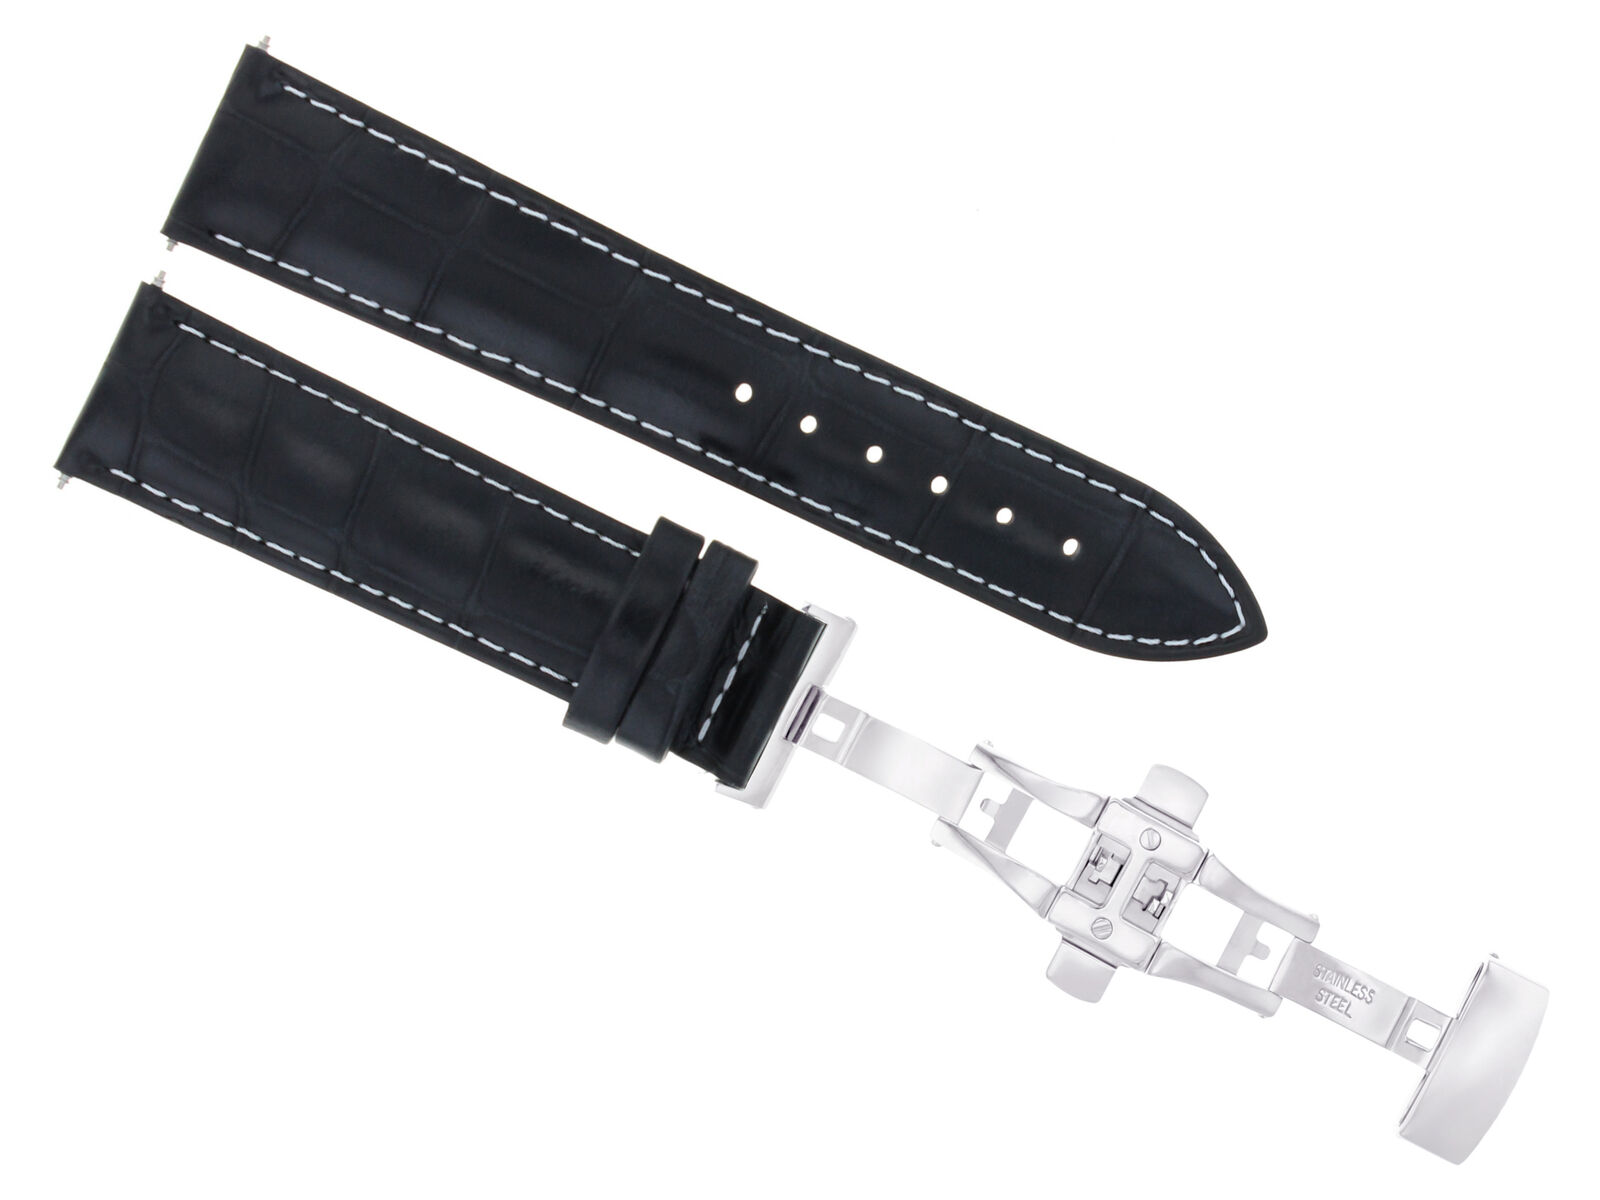 24MM LEATHER STRAP BAND DEPLOYMENT CLASP FOR VACHERON CONSTANTIN WATCH BLACK WS